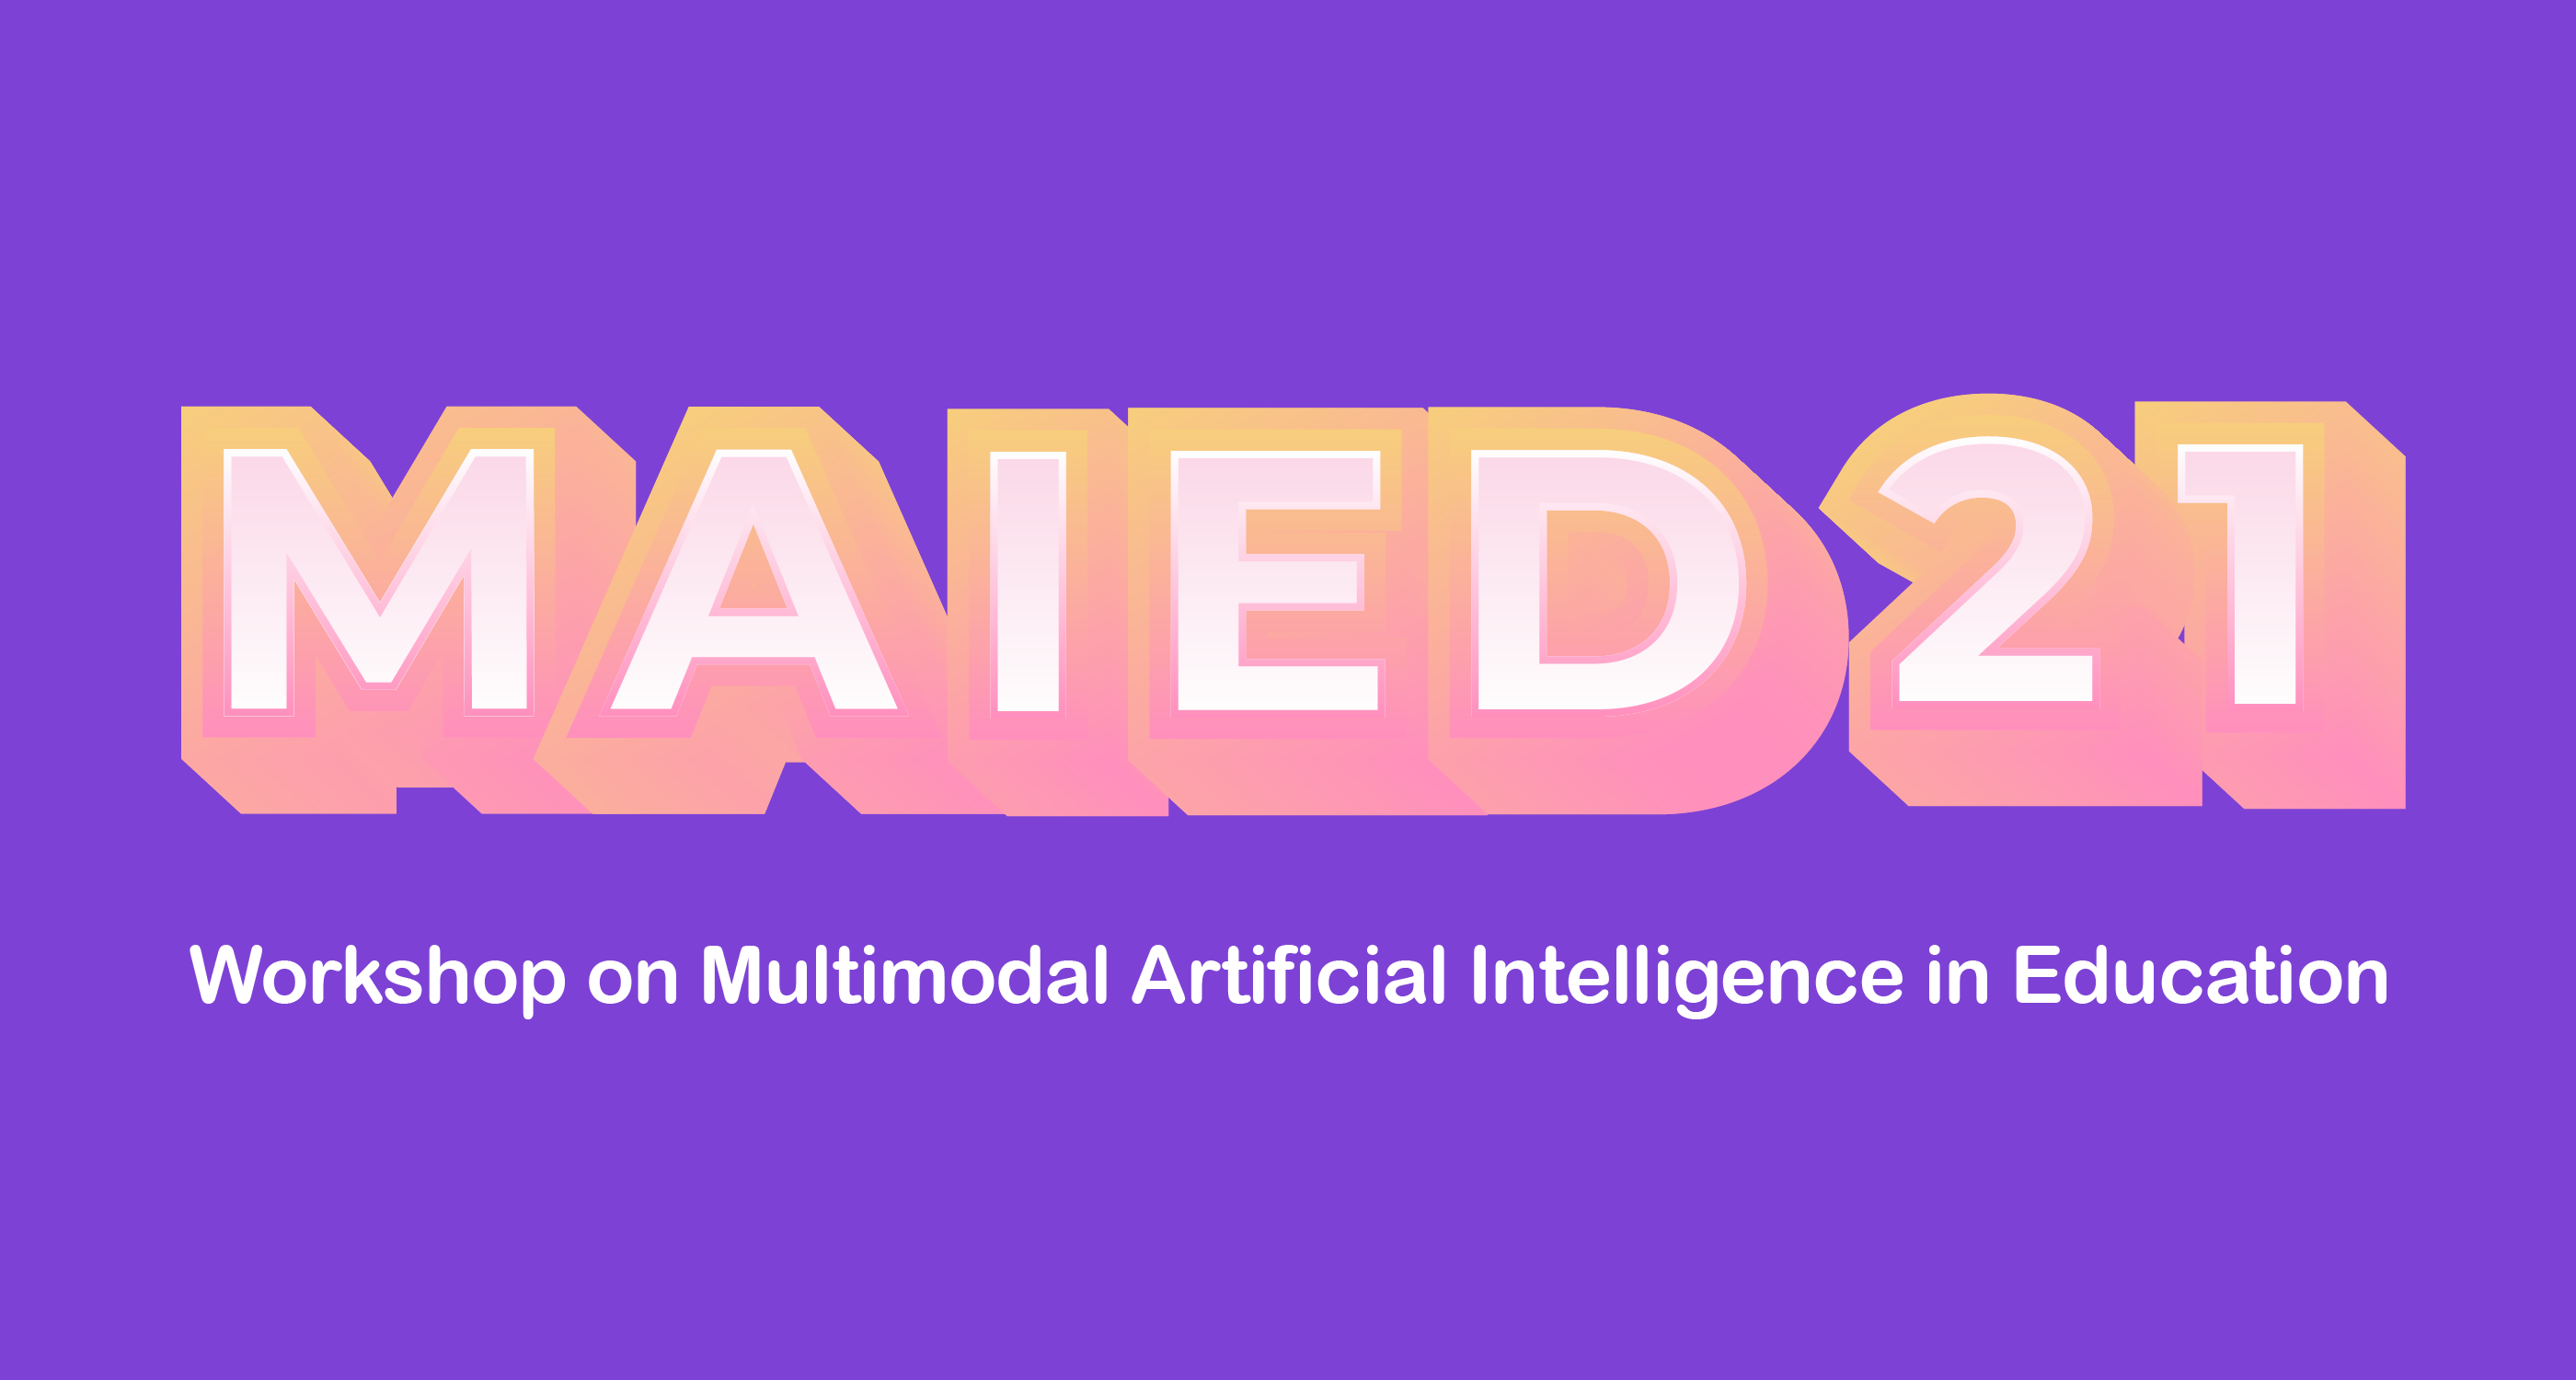 Workshop on Multimodal Artificial Intelligence in Education (MAIEd'21) 